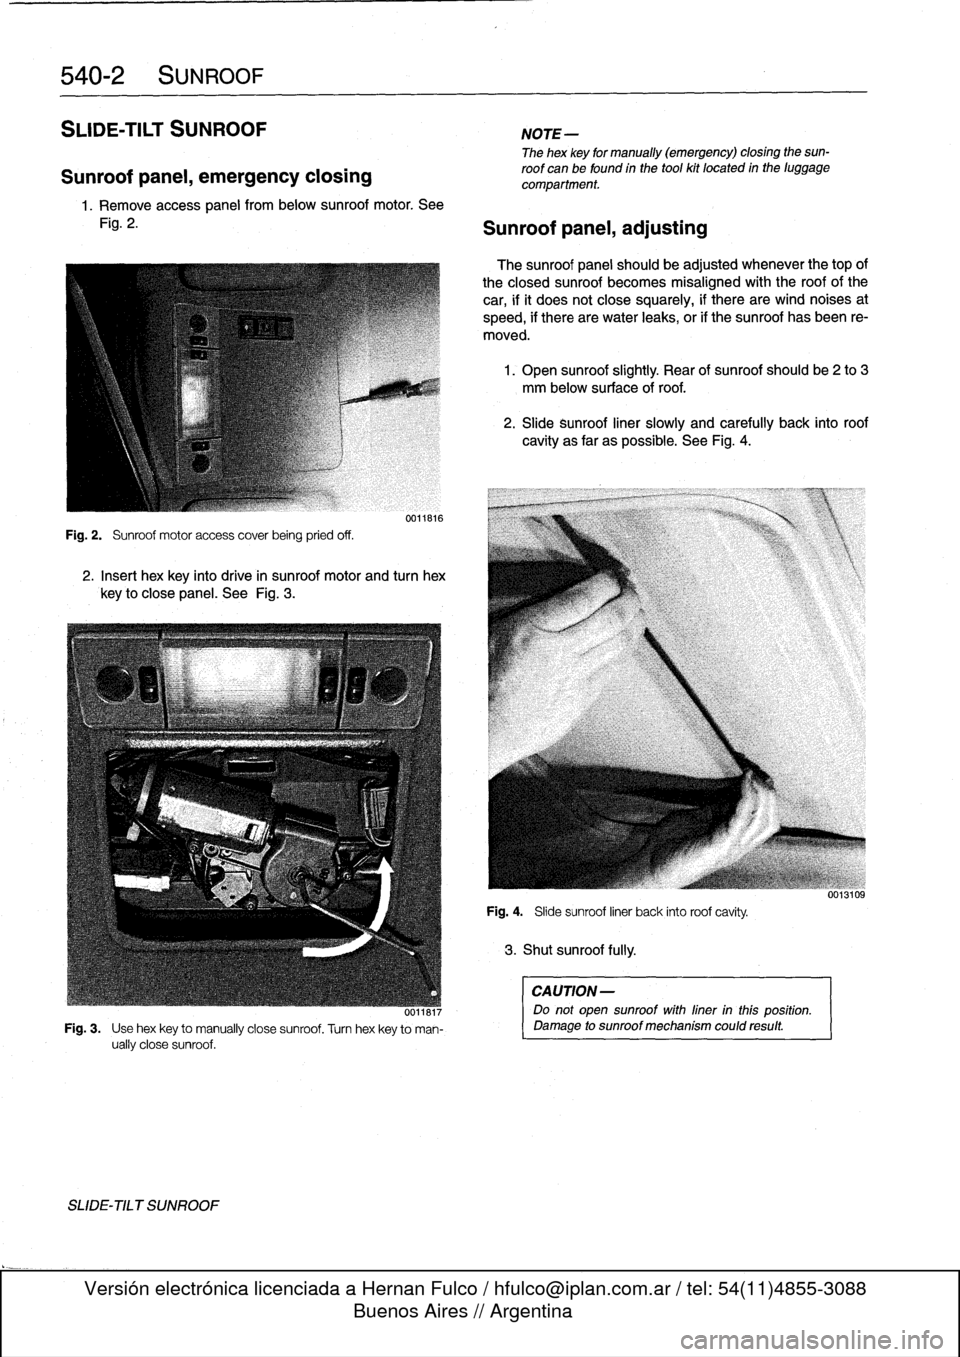 BMW 323i 1993 E36 Workshop Manual 
540-2
SUNROOF

SLIDE-TILT
SUNROOF

Sunroof
panel,
emergency
closing

1.
Remove
access
panel
frombelow
sunroof
motor
.
See

Fig
.
2
.

Fig
.
2
.

	

Sunroof
motor
access
coverbeing
pried
off
.

001181